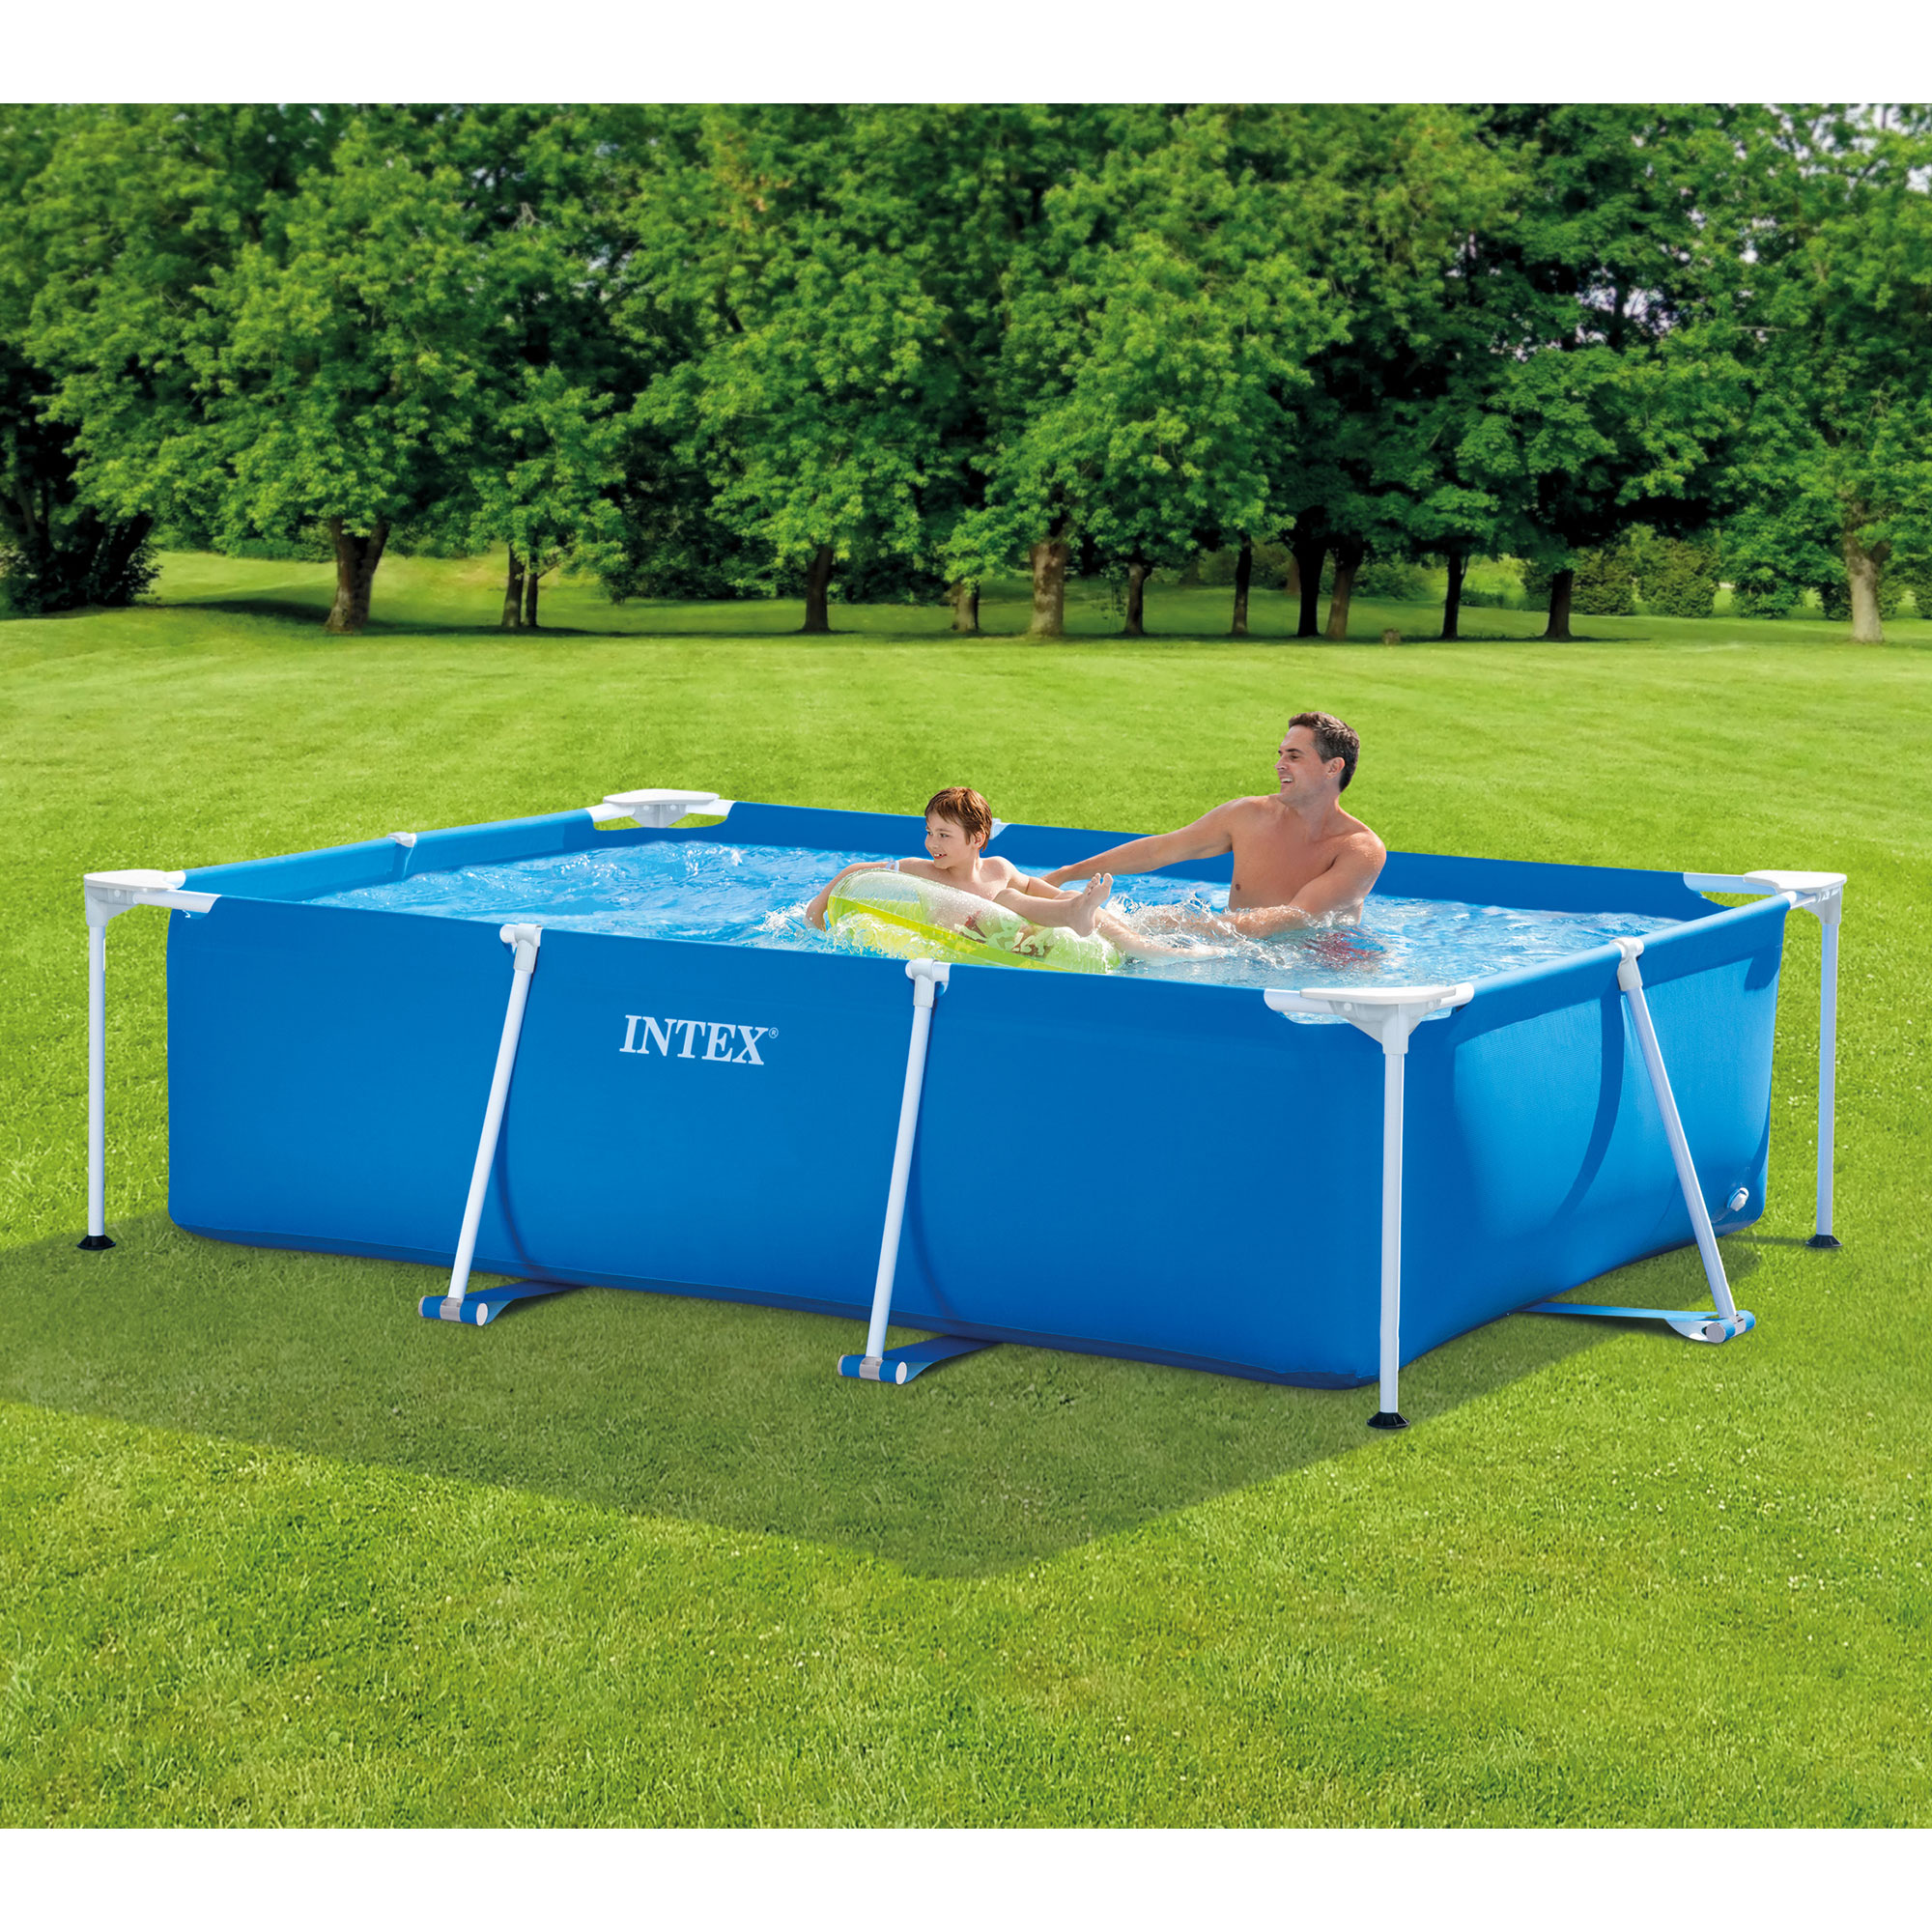 Intex 8.5ft x 26in Rectangular Frame Above Ground Swimming Pool, Blue - image 4 of 11